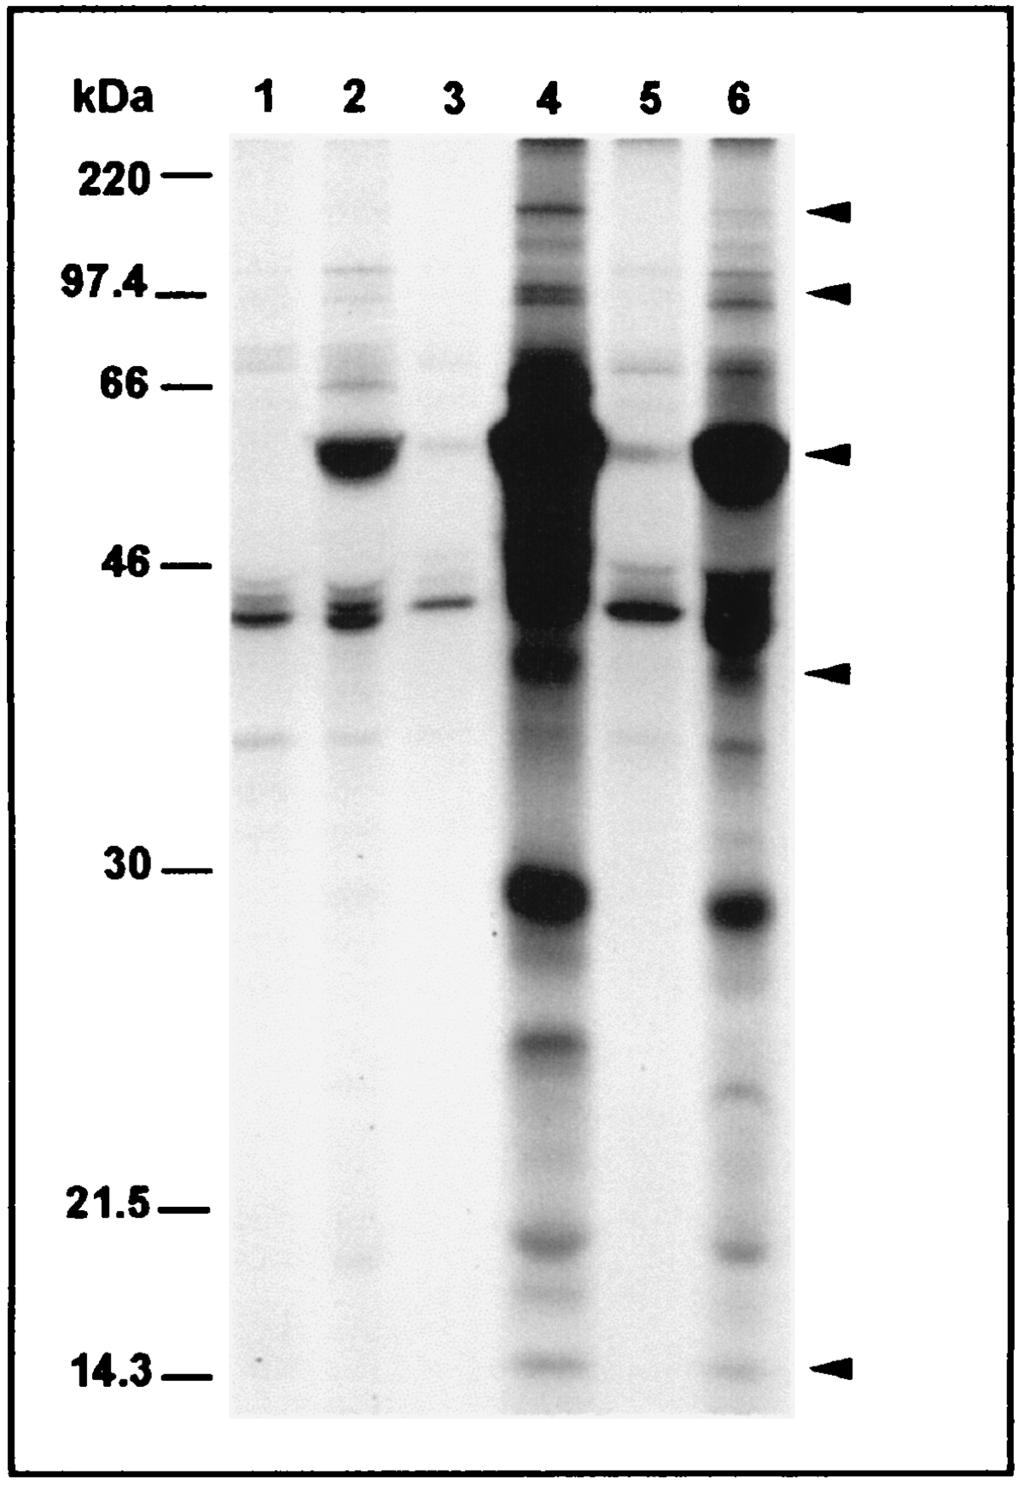 VOL. 6, 1999 ANALYSIS OF IMMUNE RESPONSE TO CHLAMYDIA PNEUMONIAE 823 FIG. 4. Autoradiographs of SDS-PAGE gels showing a sequential immunoprecipitation of C.